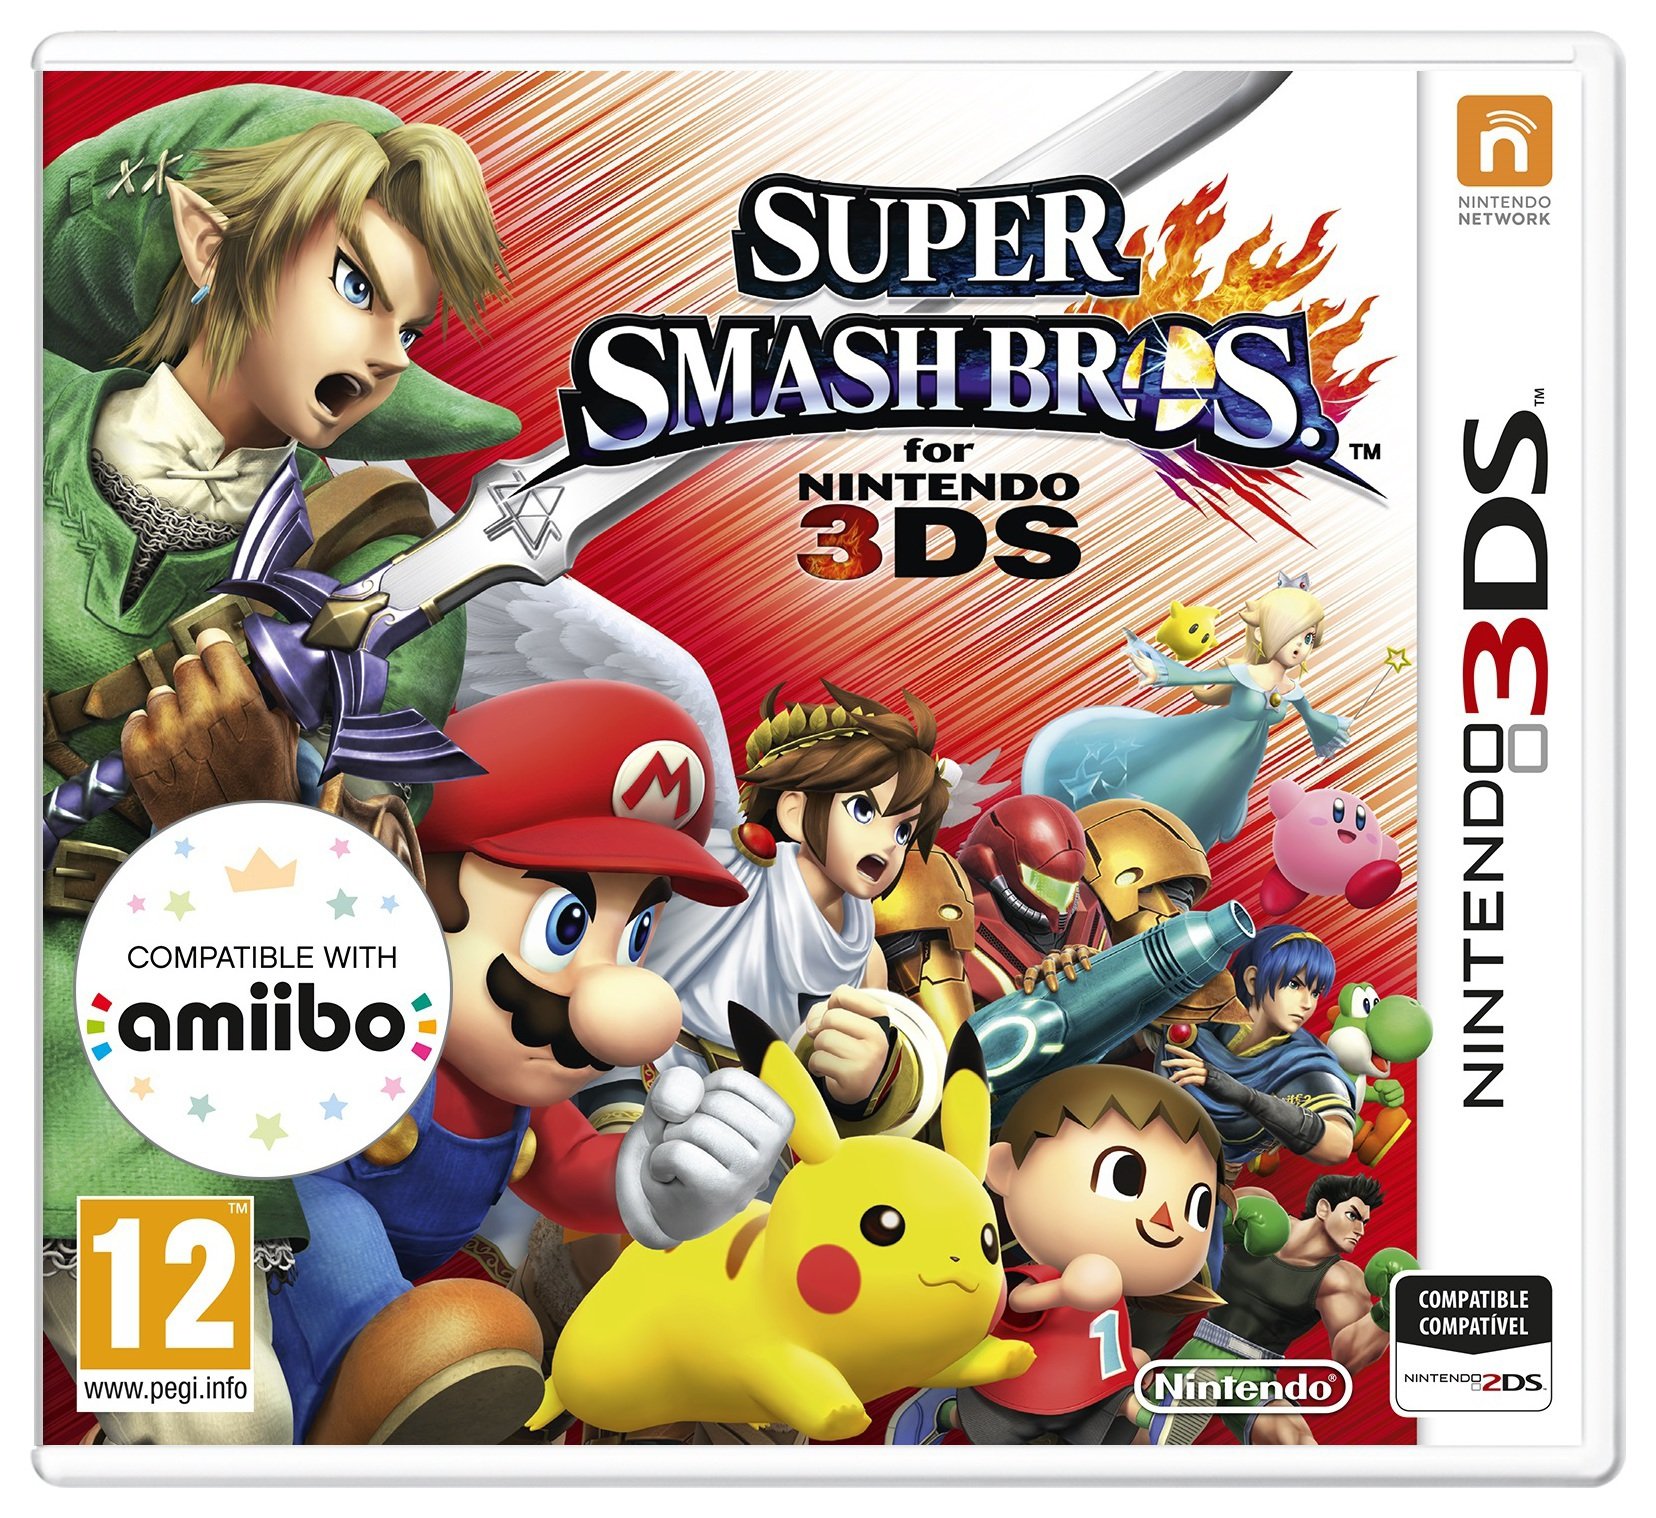 Super Smash Brothers 3DS Game featuring Pokemon